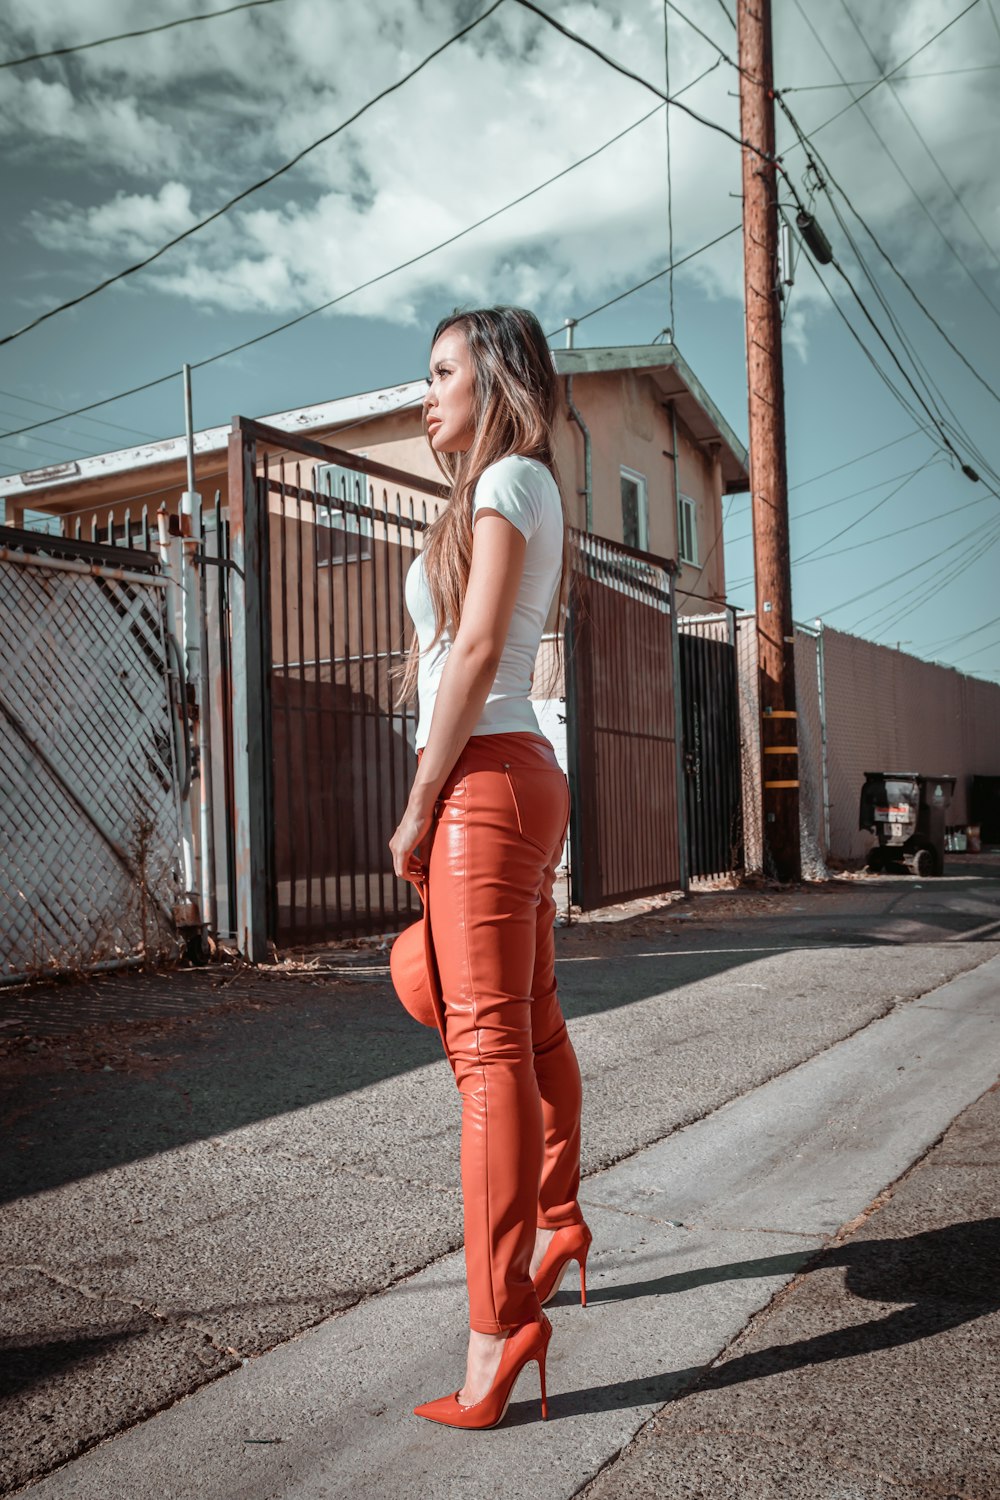 woman in white shirt and red pants standing on sidewalk during daytime